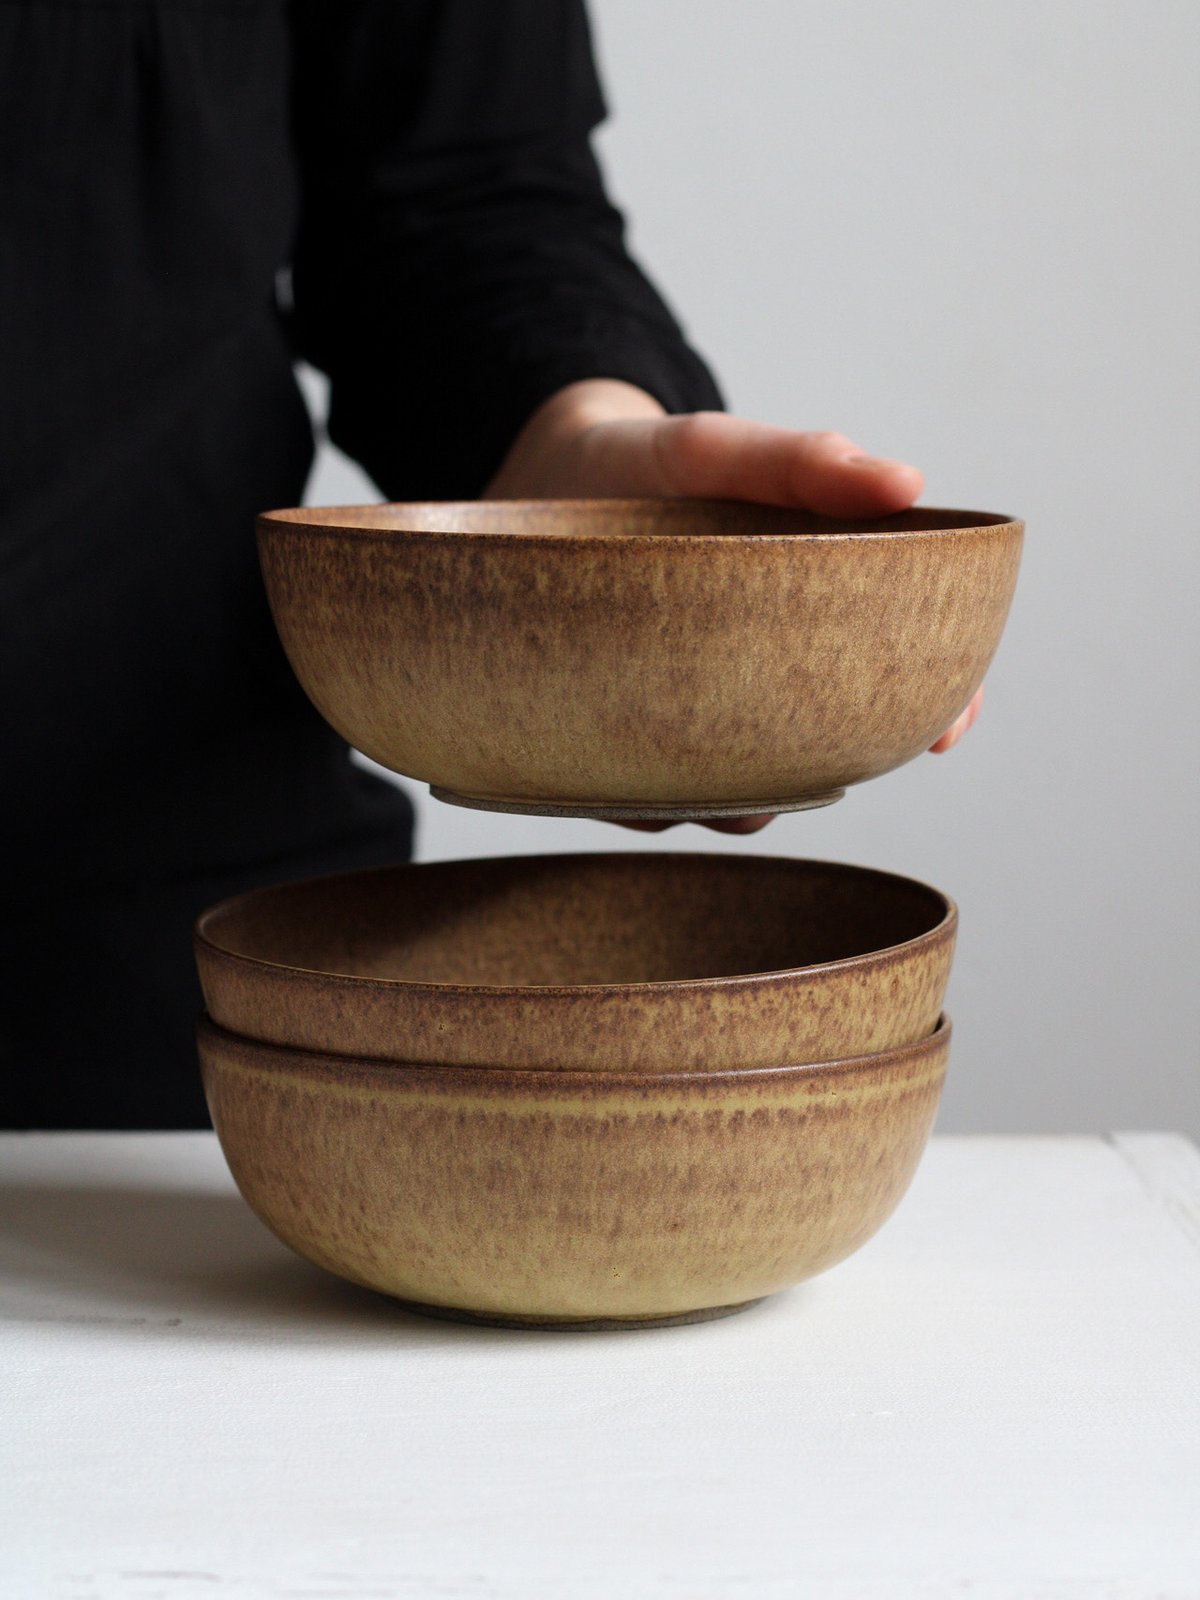 Image of low bowl in umber